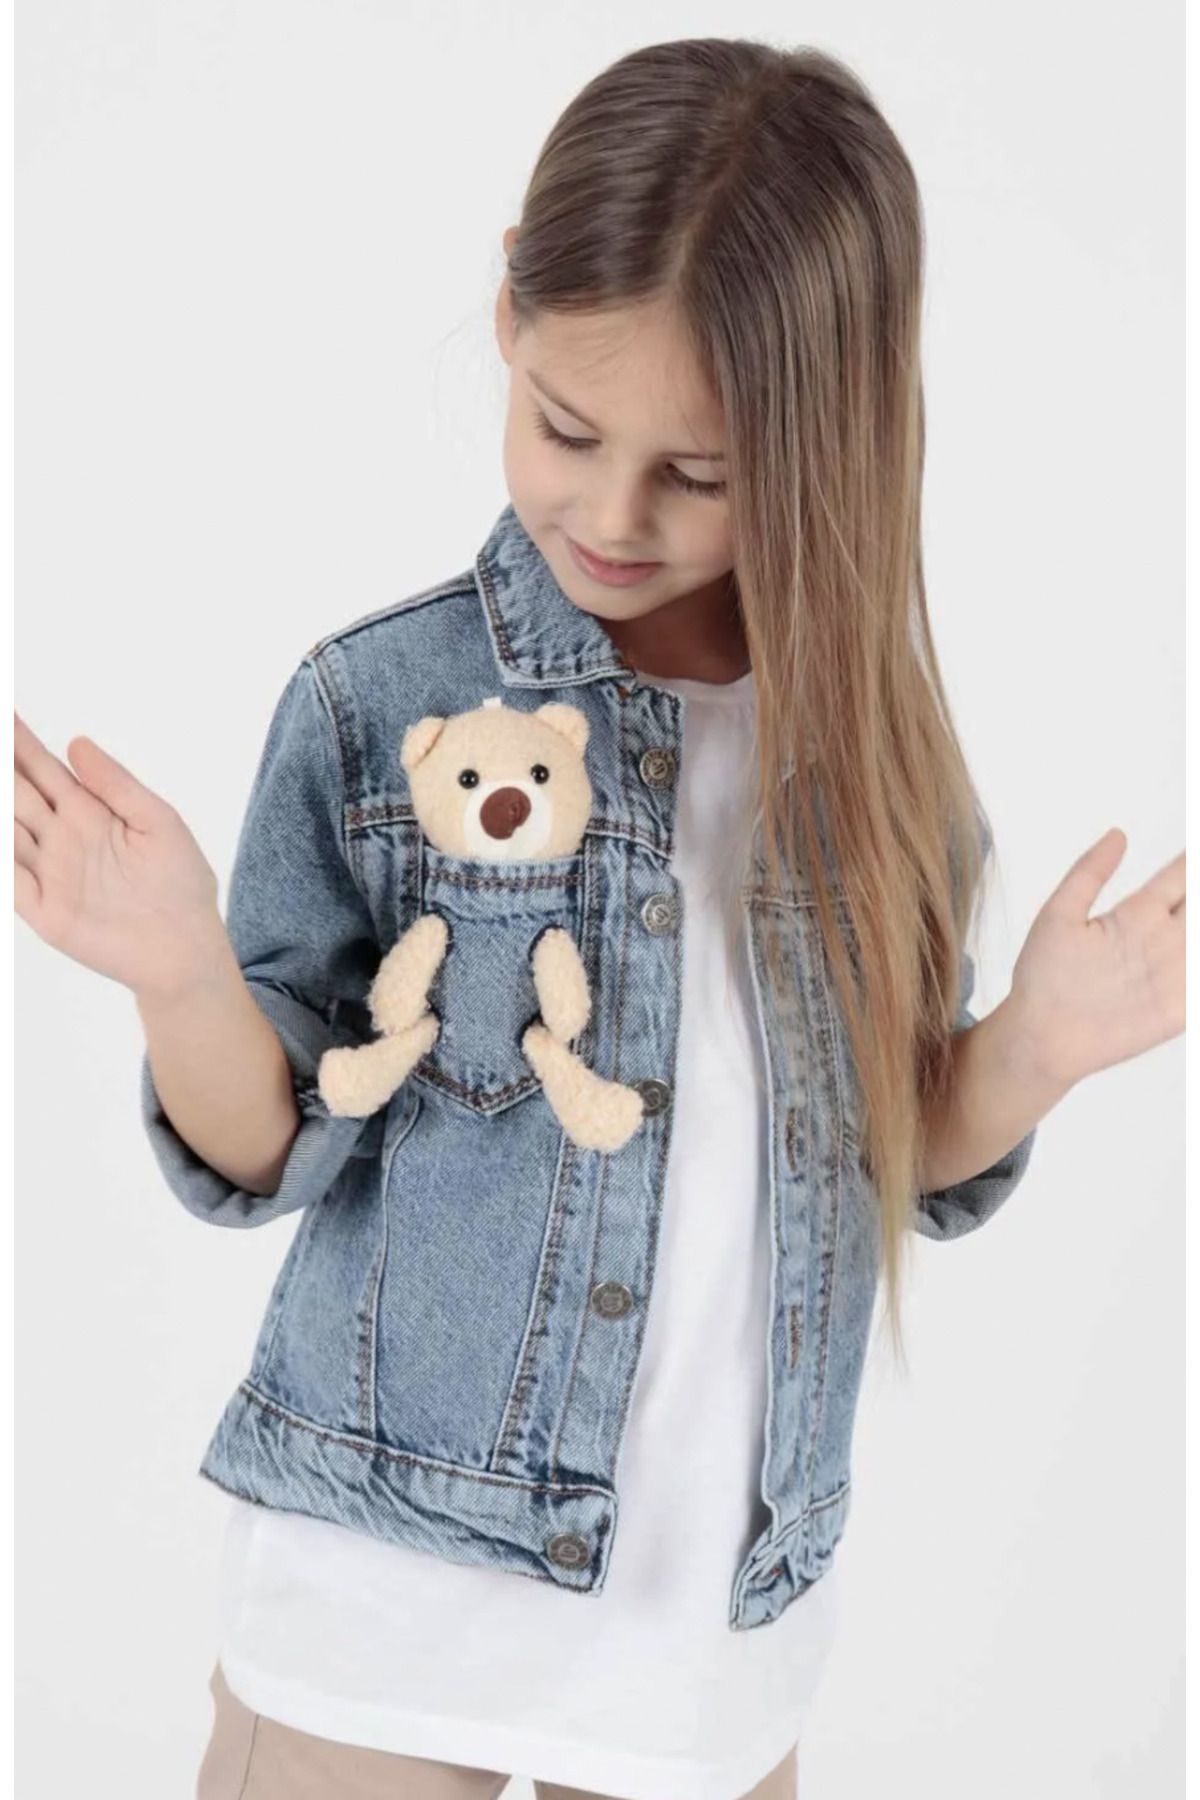 Ripped jean jacket with sequin teddy bear Daysie | Paris Fashion Shops